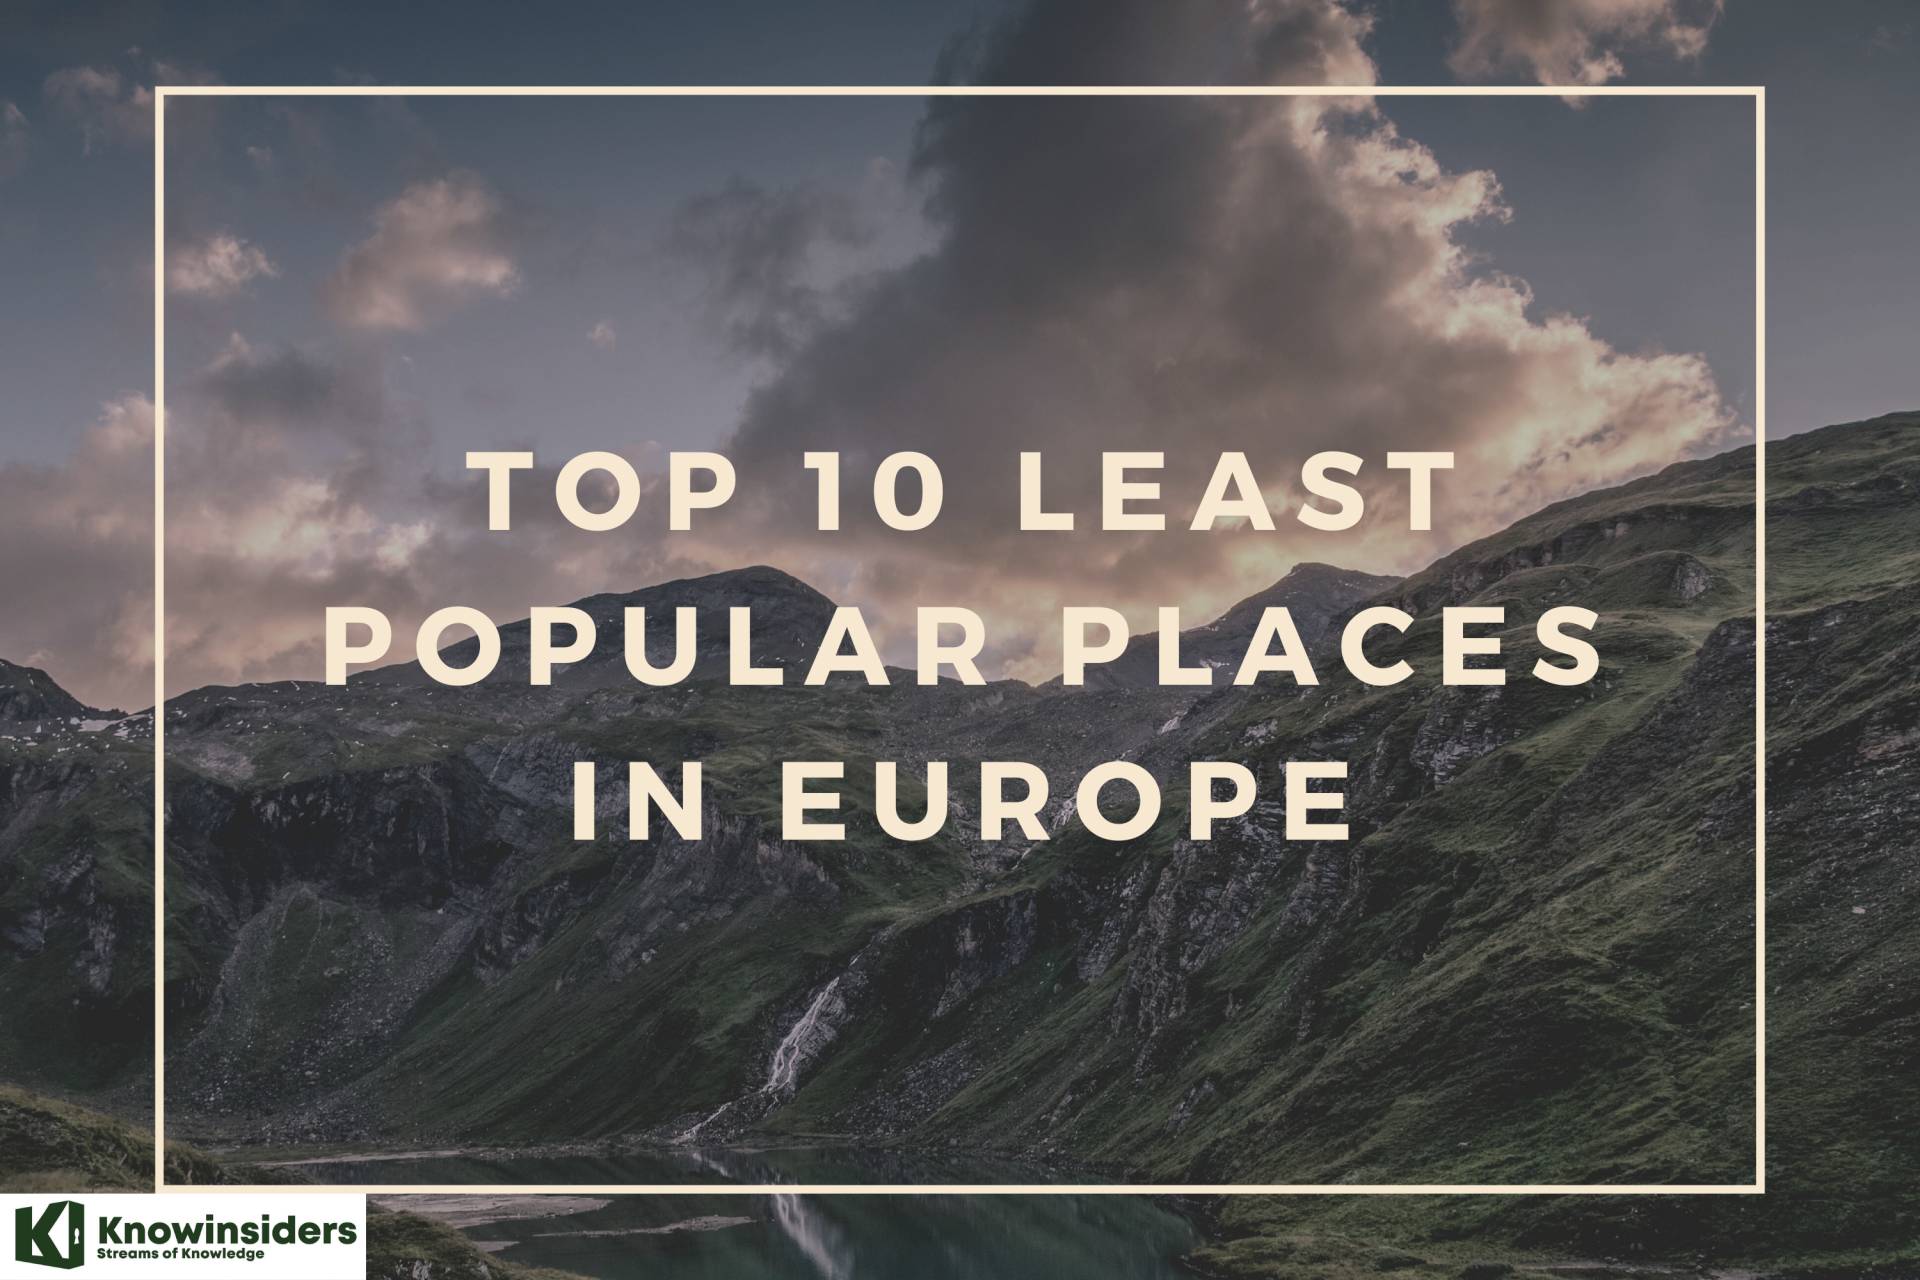 Top 10 Least Popular Places in Europe That You Don't Want to Visit